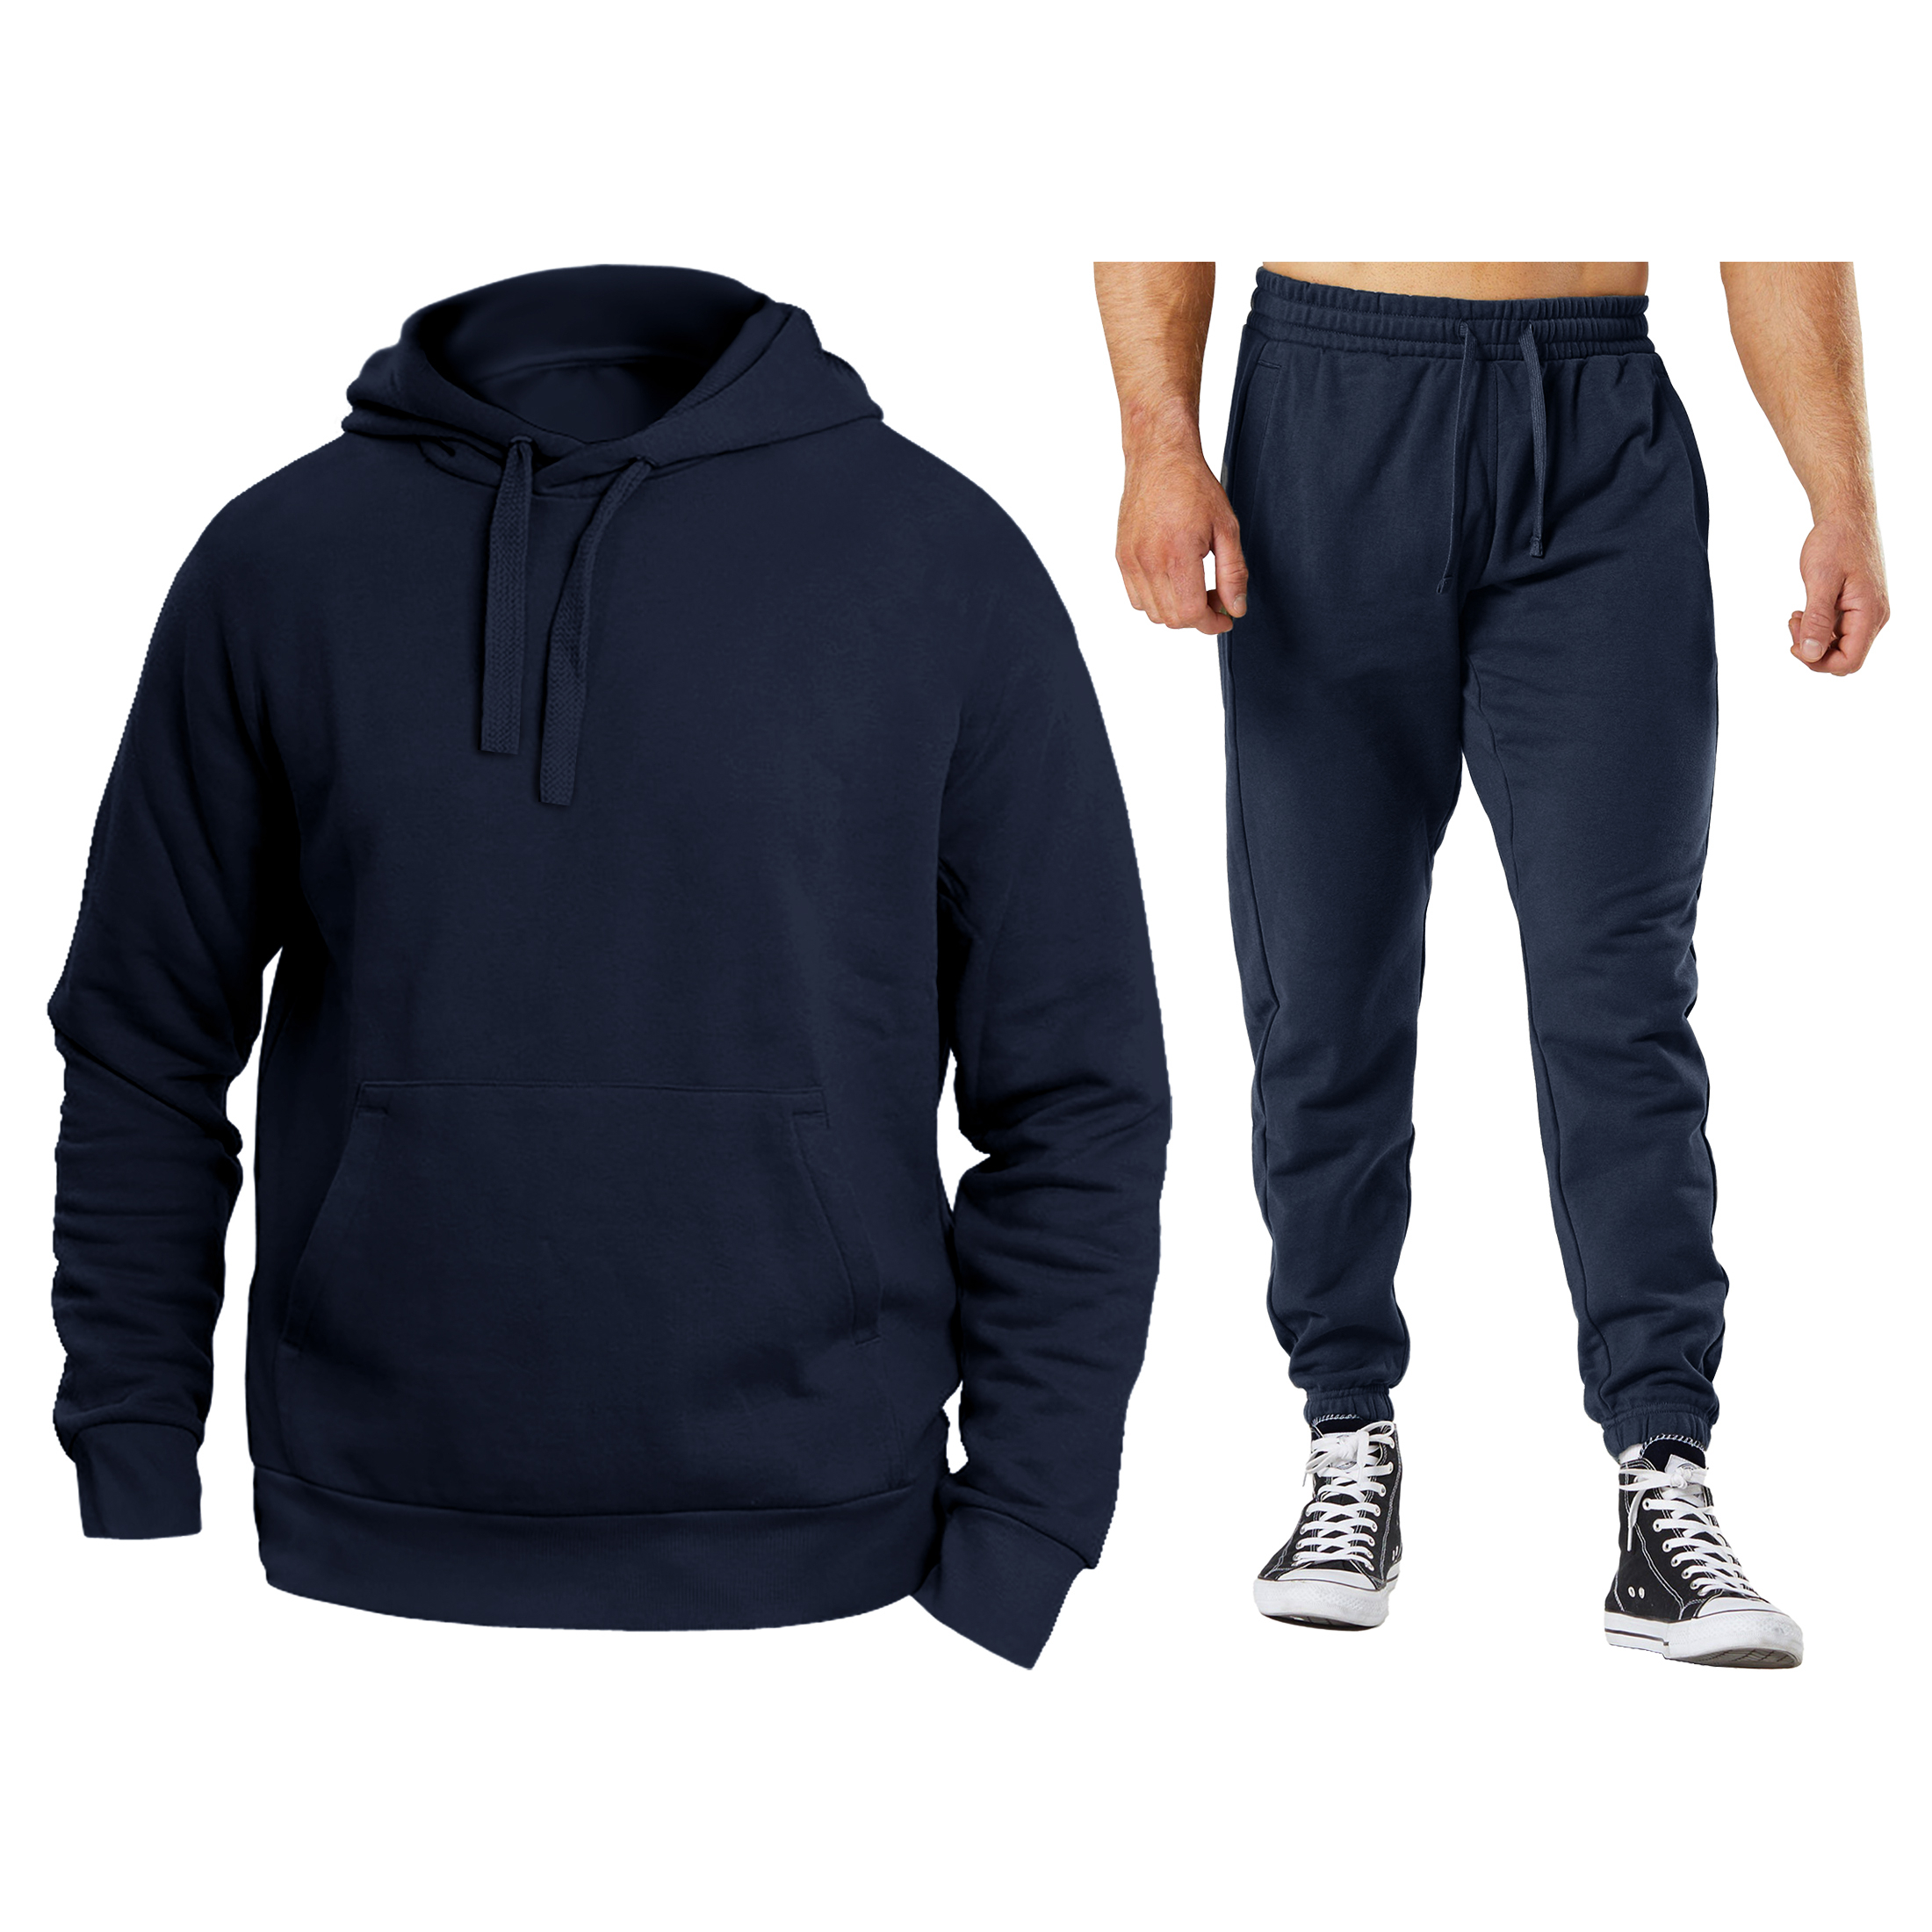 Men's Athletic Warm Jogging Pullover Active Sweatsuit - Charcoal, Small